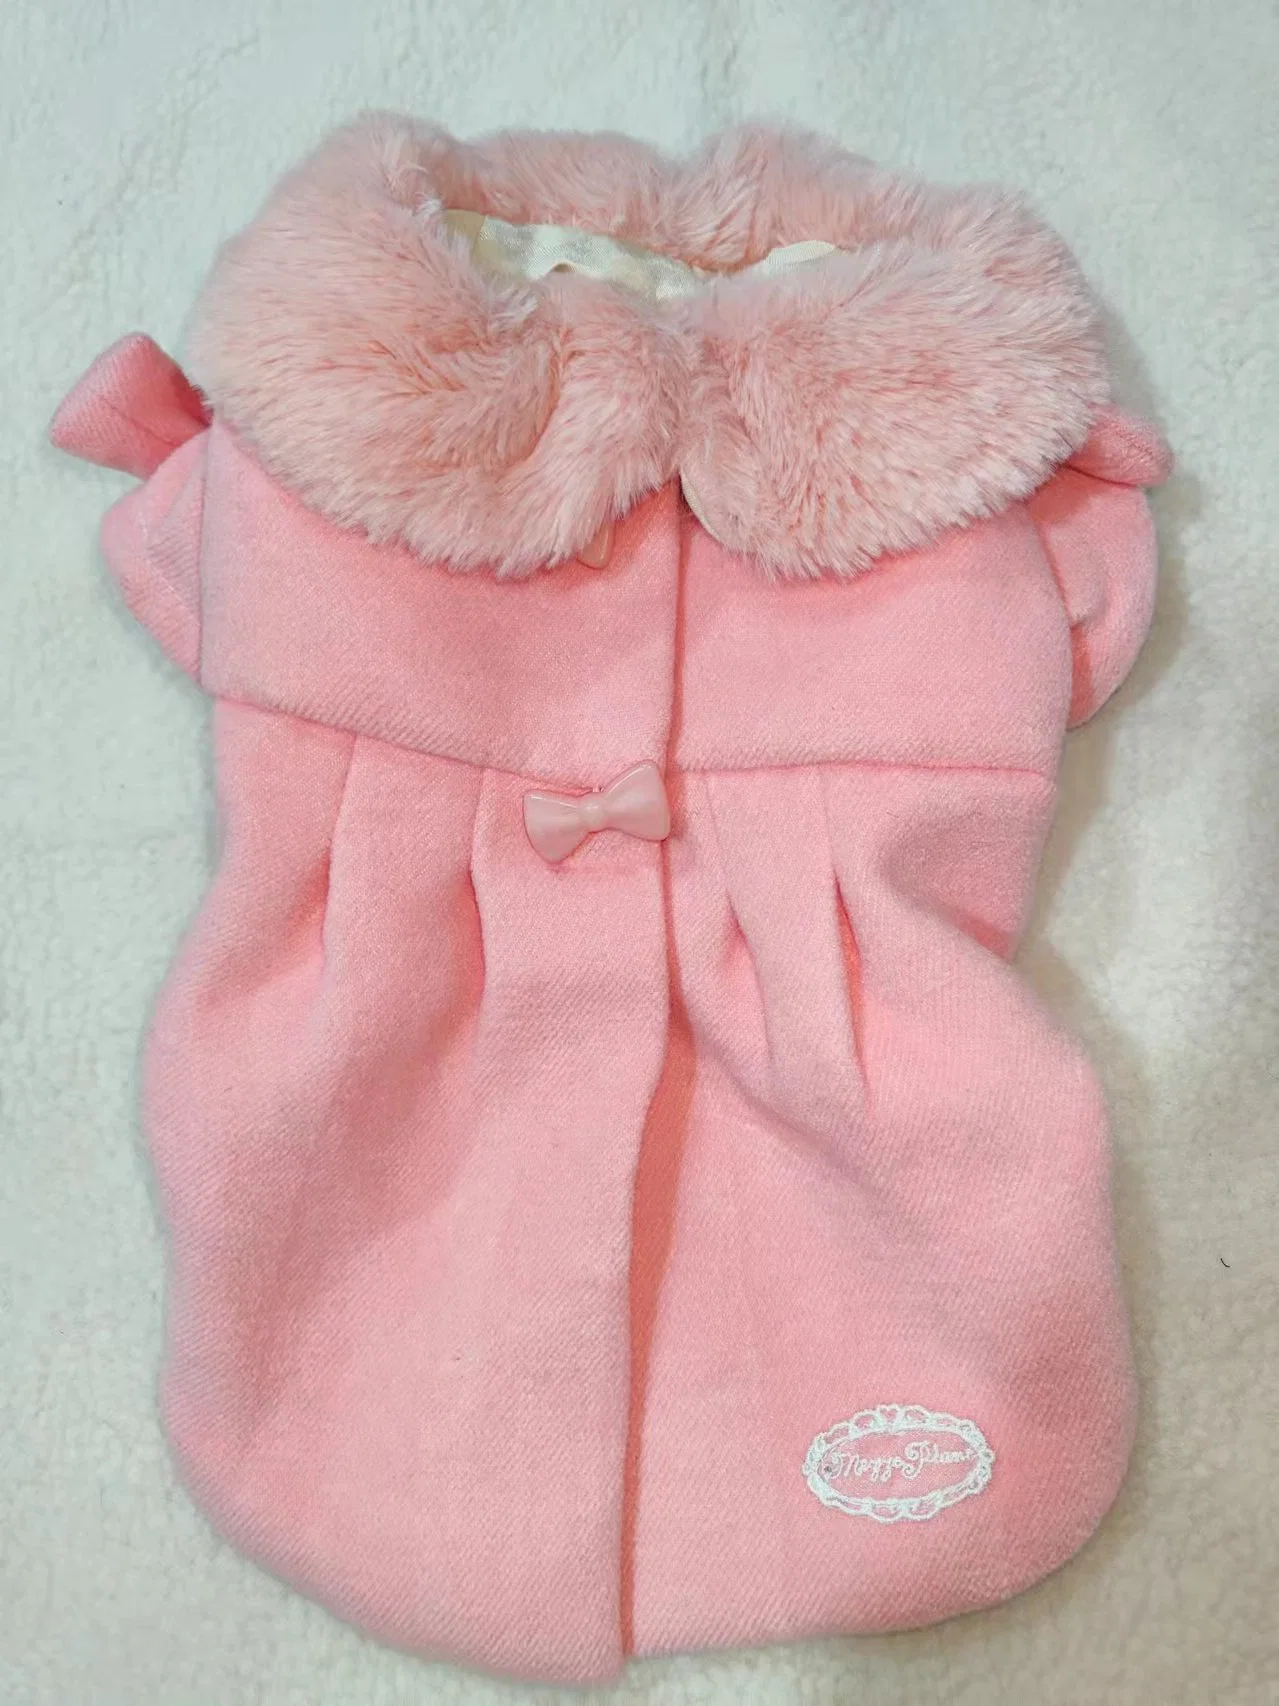 Fashion Designer Dog Clothes Pet Products Trading Company Dog Clothes